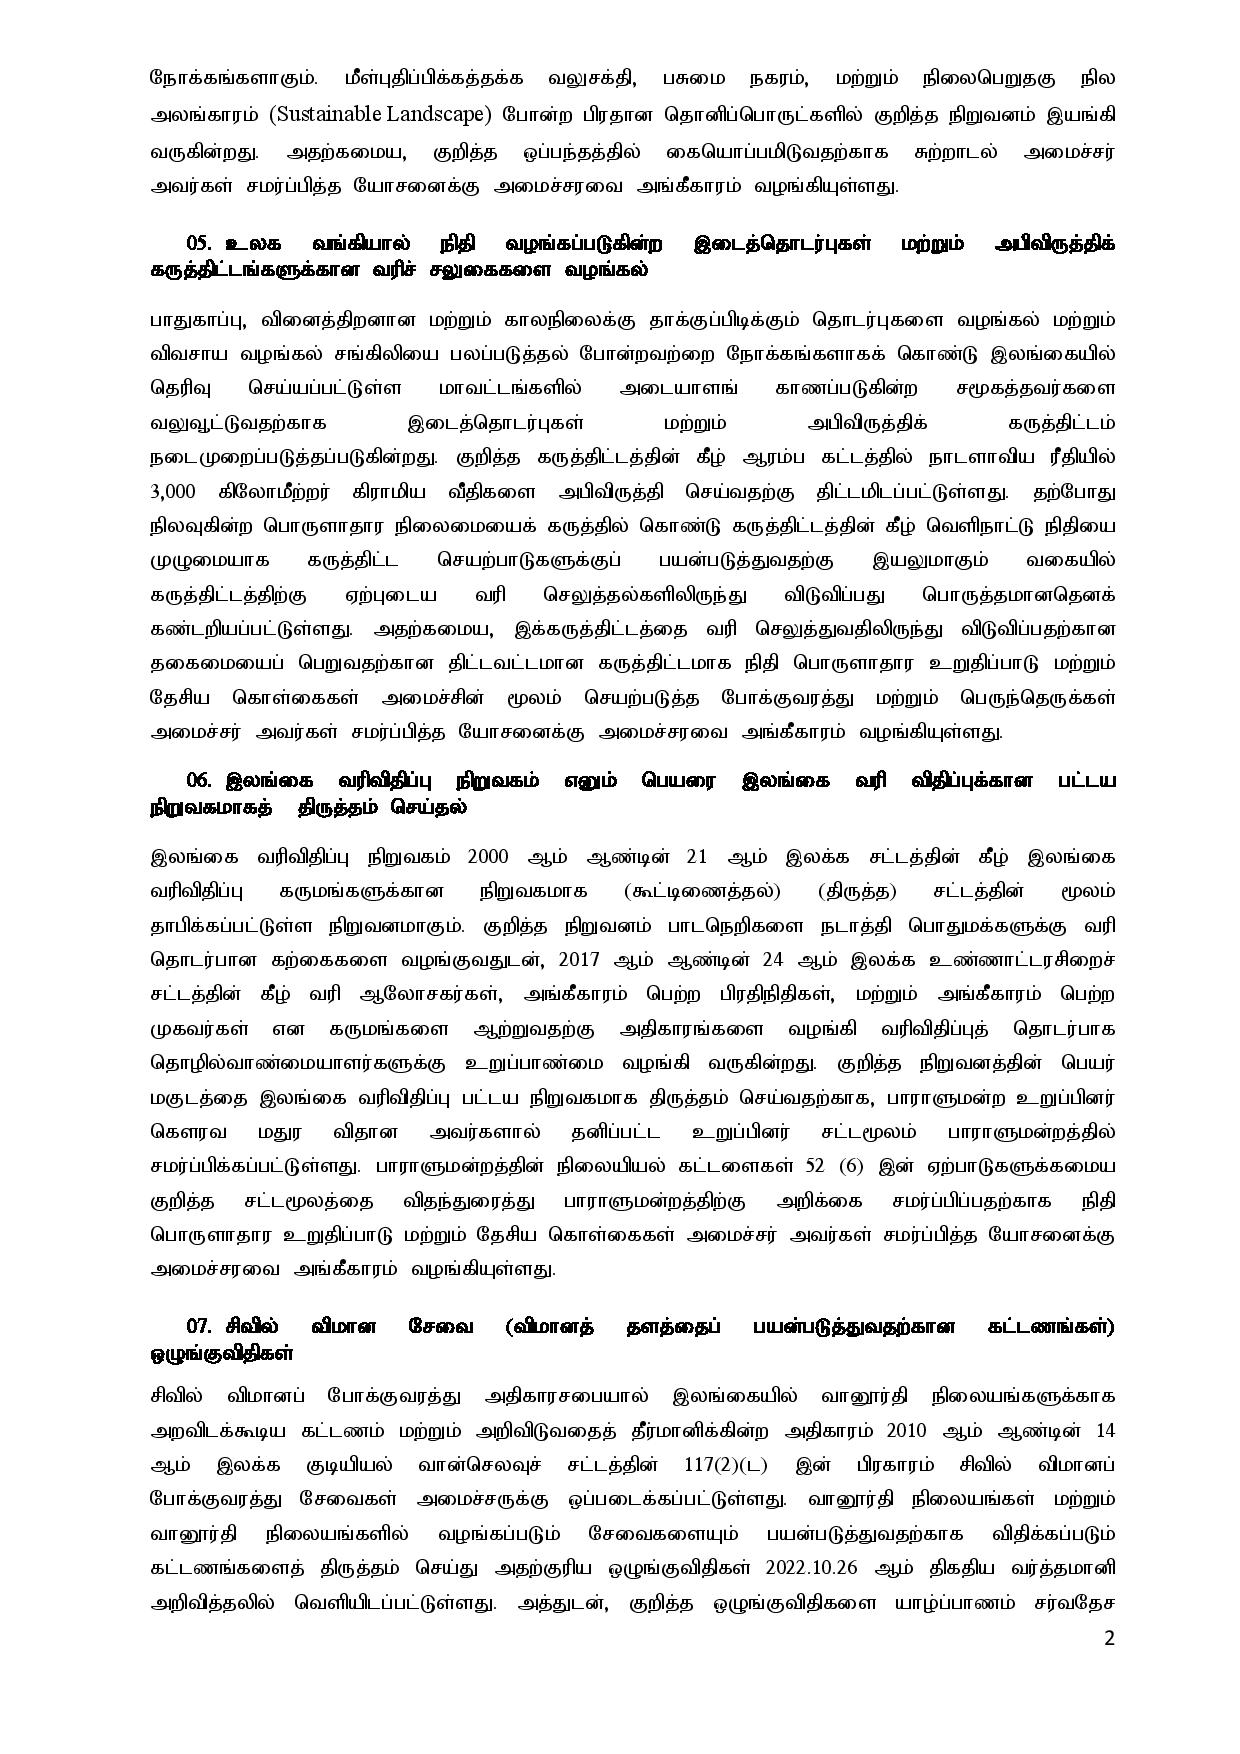 Cabinet Decisions on 16.01.2023 Tamil 1 page 002